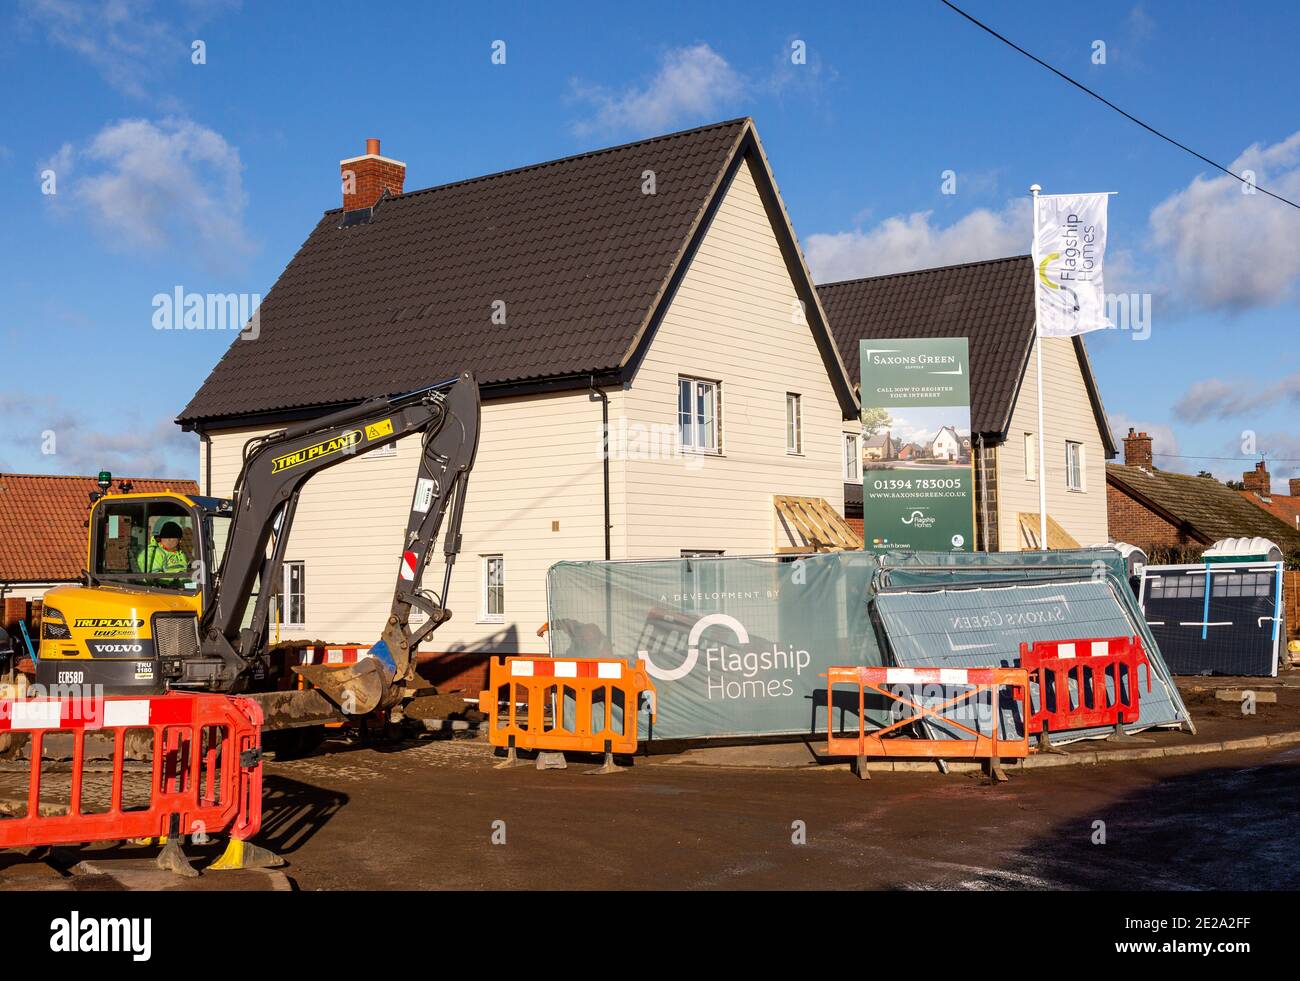 Saxons Green private housing development by Flagship Homes, Sutton, Suffolk, England, UK Stock Photo